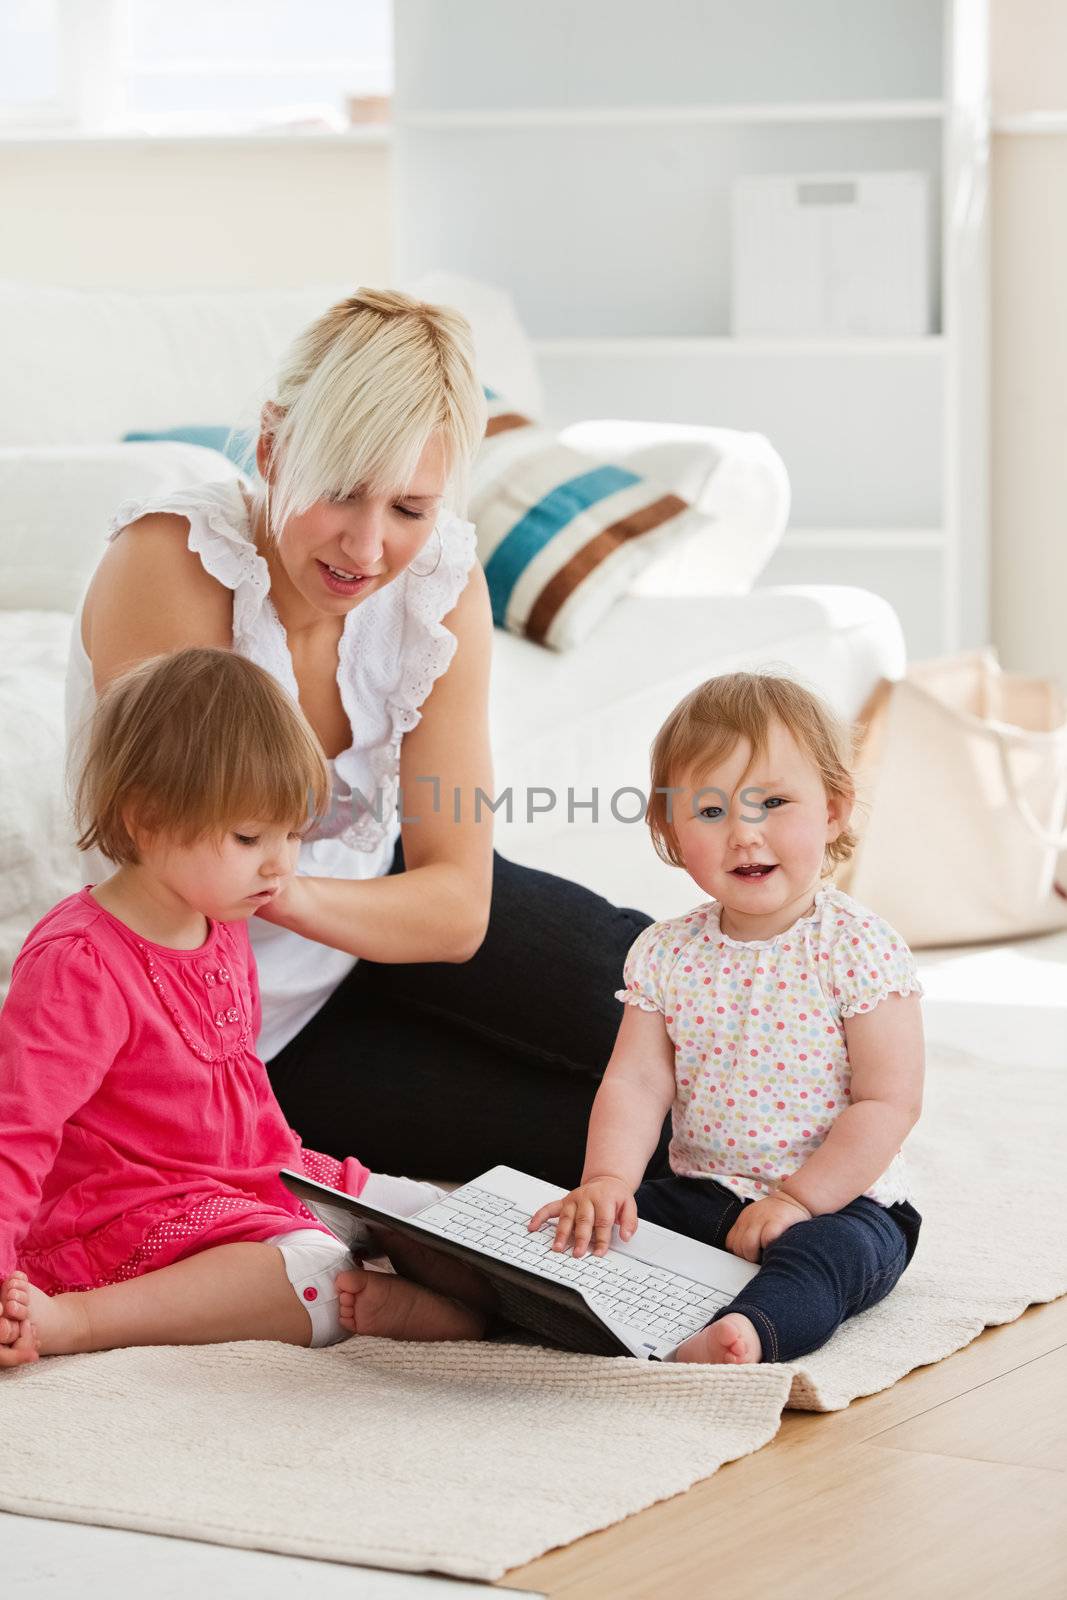 Good-looking working with her children at laptop in living room